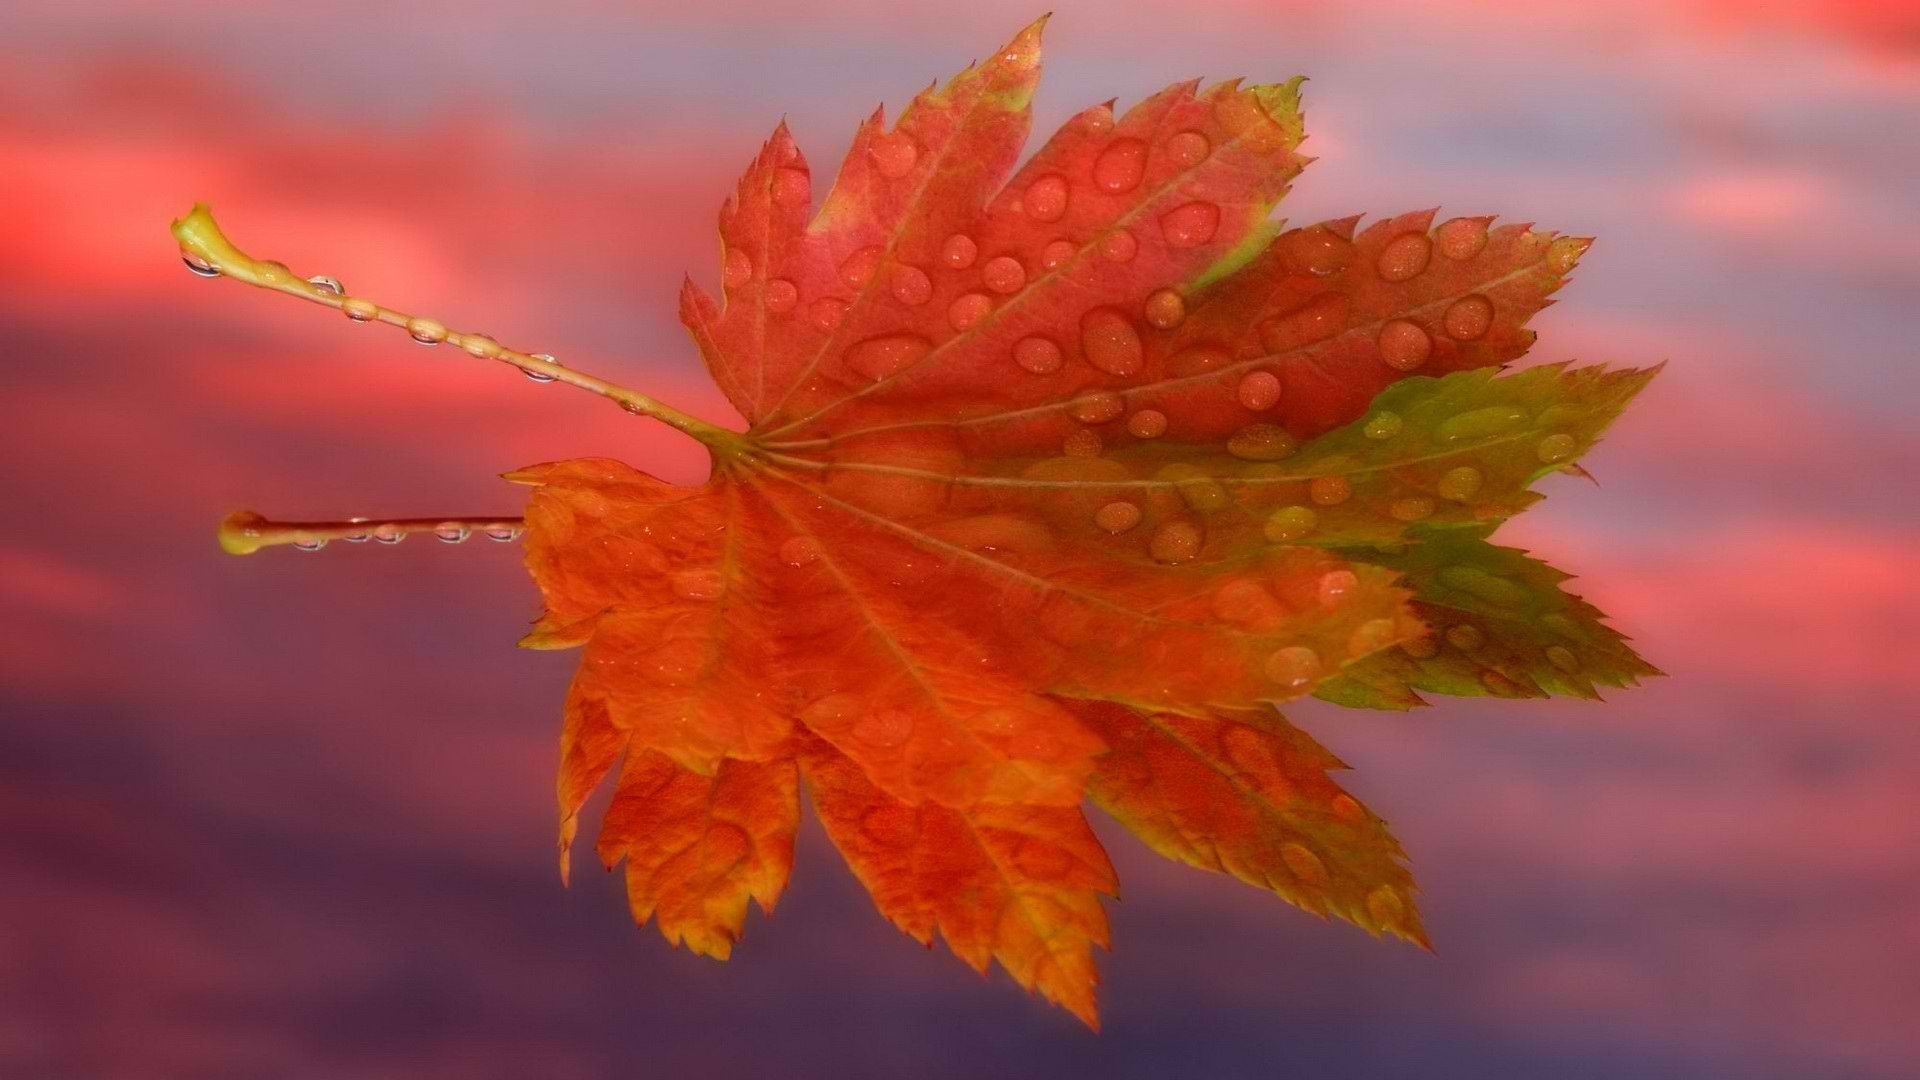 sunrise, Autumn, Maple, Leaf Wallpapers HD / Desktop and Mobile Backgrounds